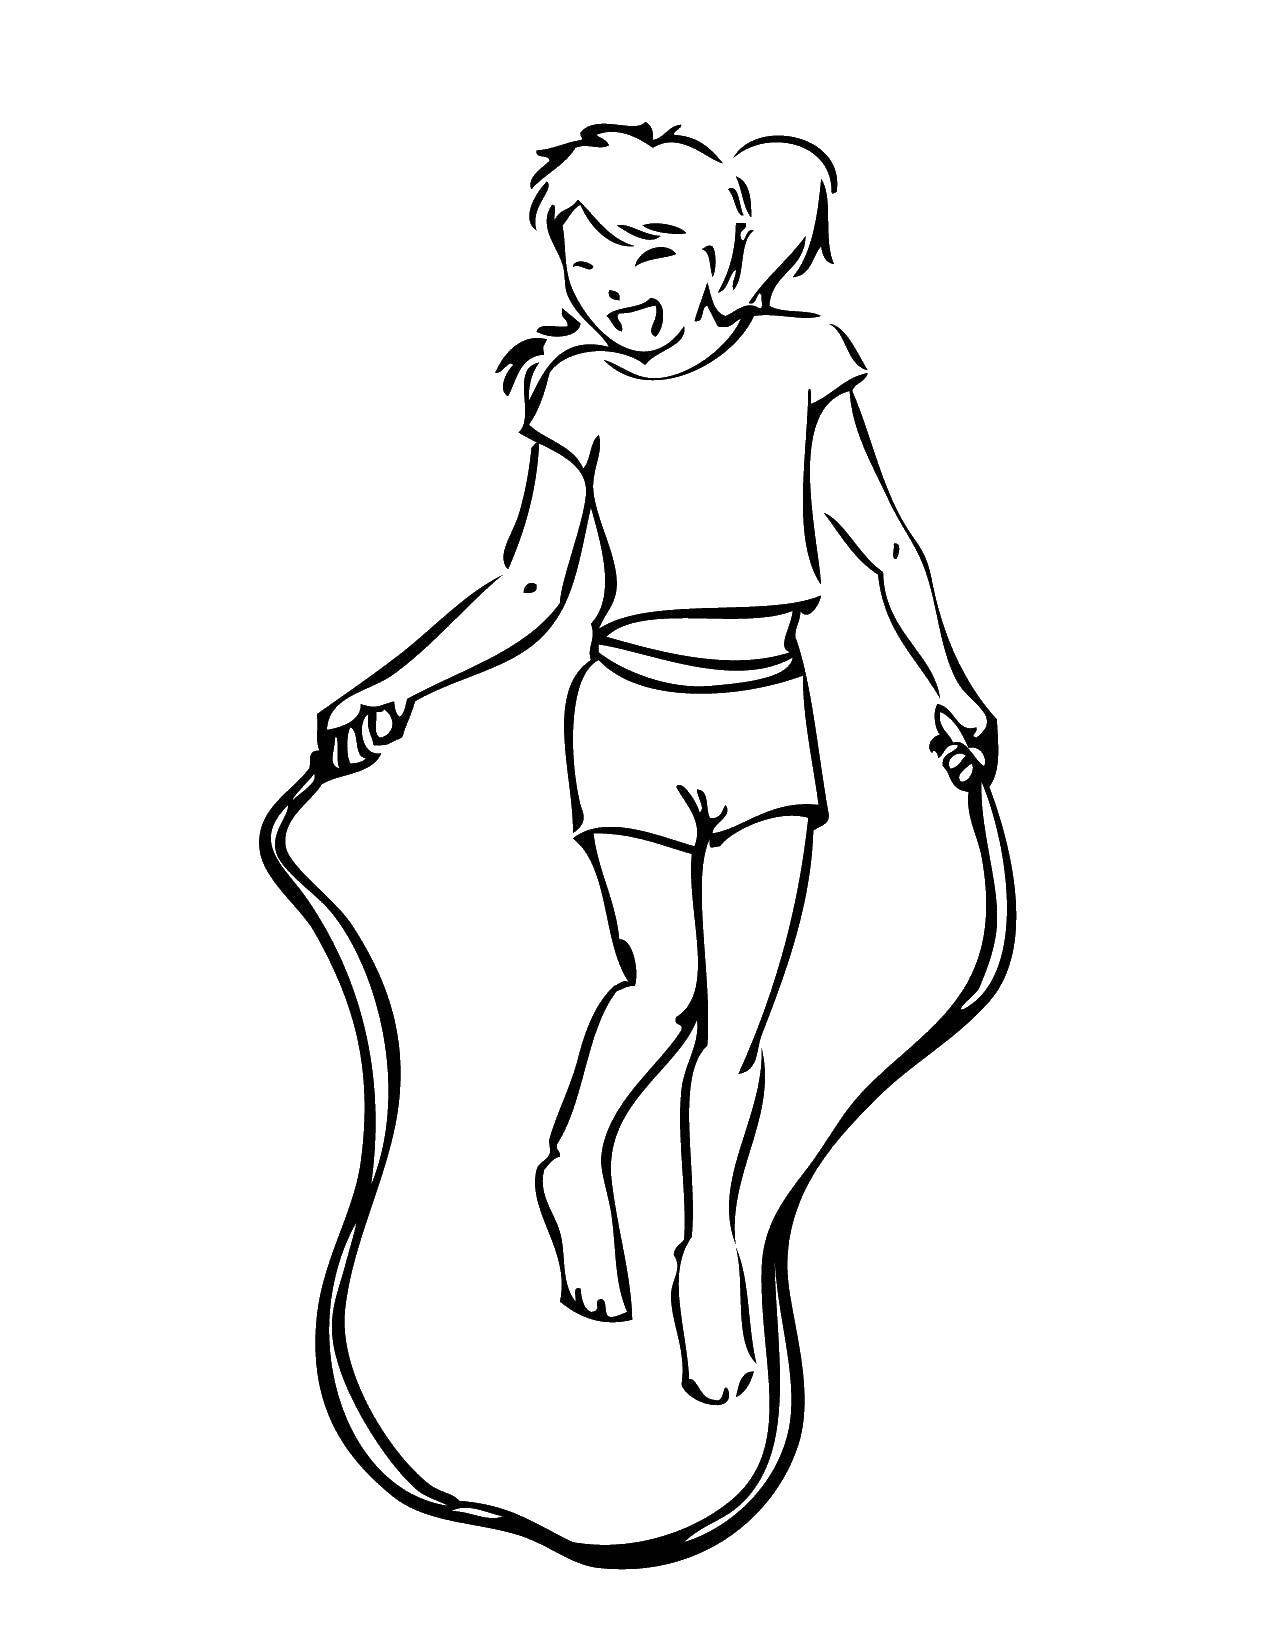 Coloring Girl in a jump. Category The jump. Tags:  jump rope, girl.